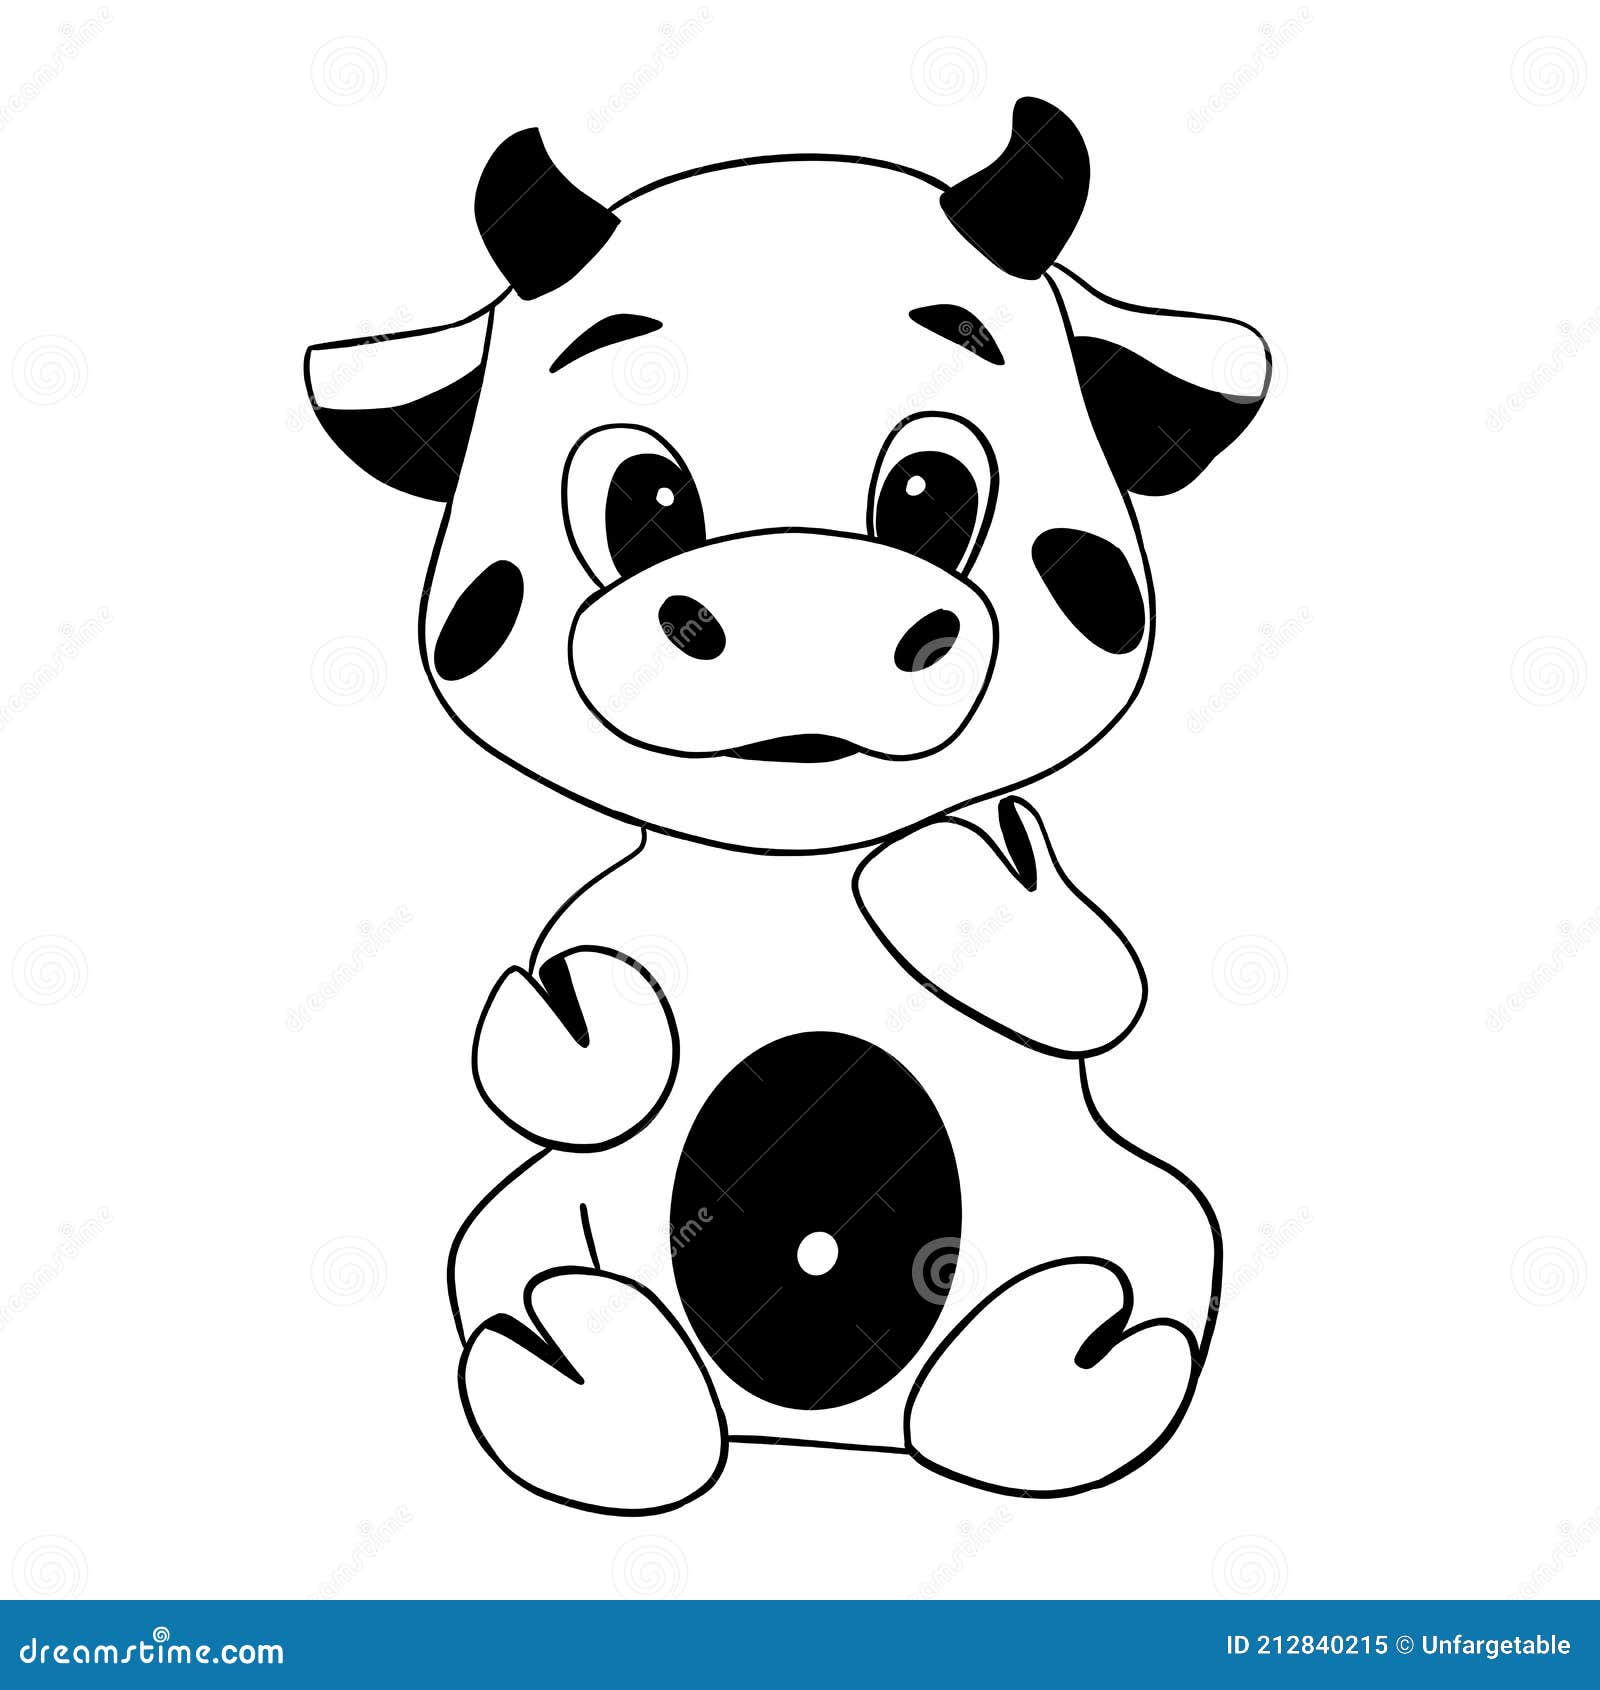 15,634 Cow Calf Drawing Images, Stock Photos & Vectors | Shutterstock